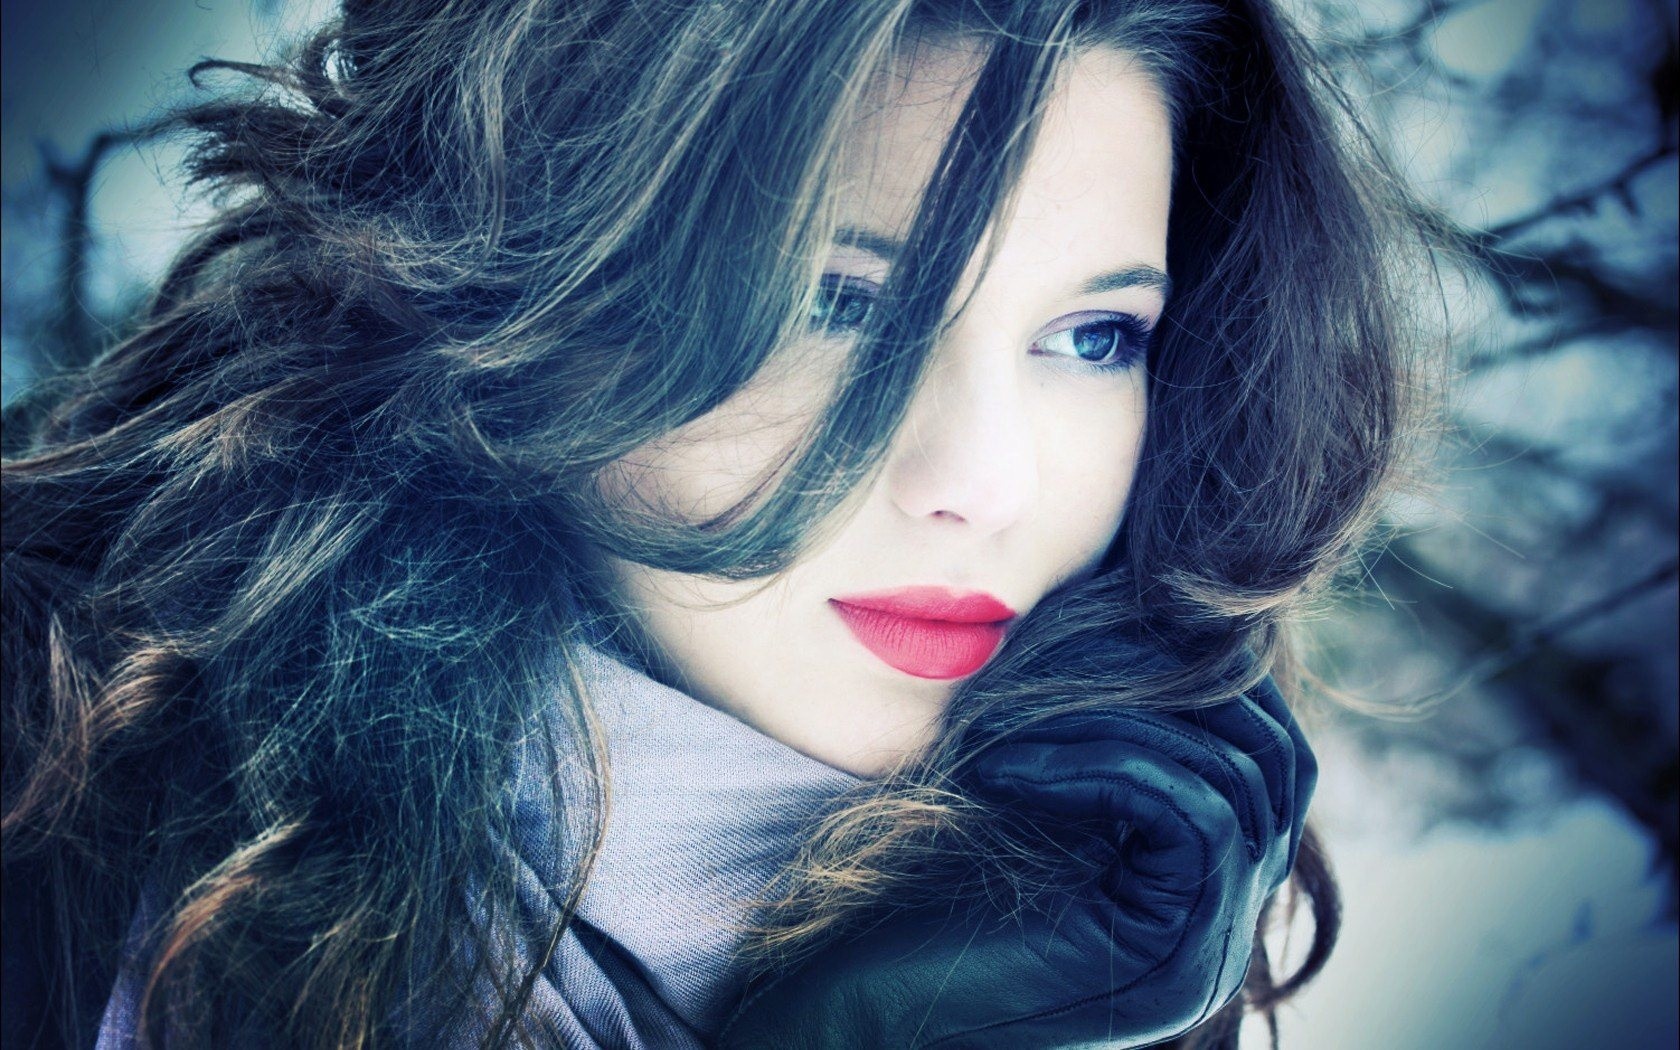 Model Soft Shading Wavy Hair Face Gloves Red Lipstick Looking Away Looking Into The Distance Women 1680x1050